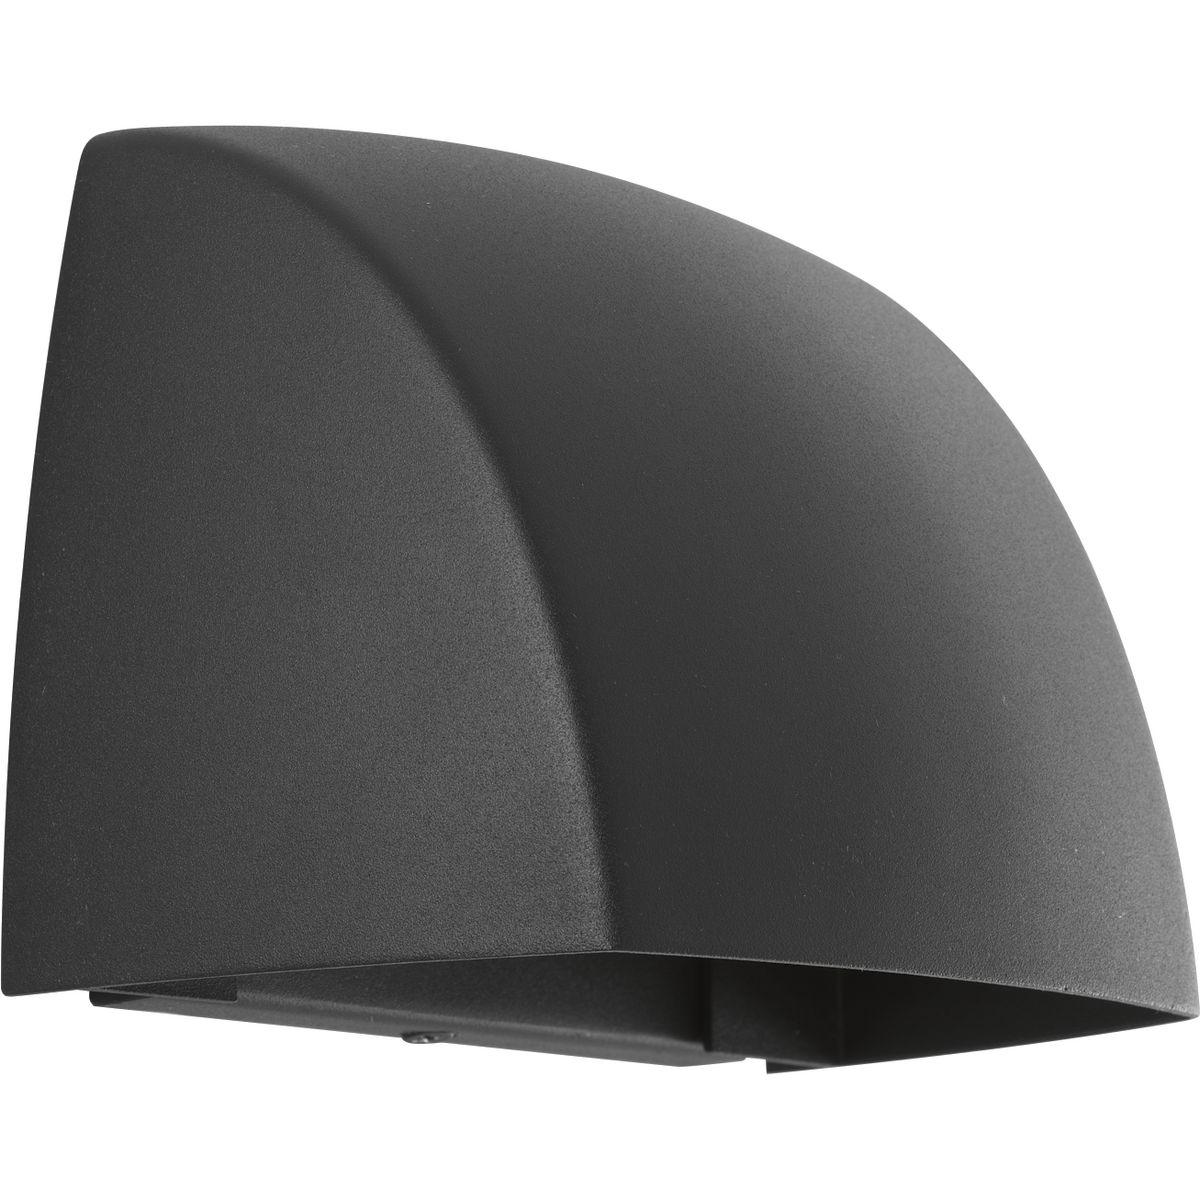 Hubbell P5634-3130K9 Modern geometric outdoor LED sconces are designed to complement a range of residential and commercial architectural styles. ADA compliant. 9w LED is 3000K, 90+ CRI in a Black cast aluminum shade. Dark Sky compliant.  ; Modern geometric outdoor LED sconces